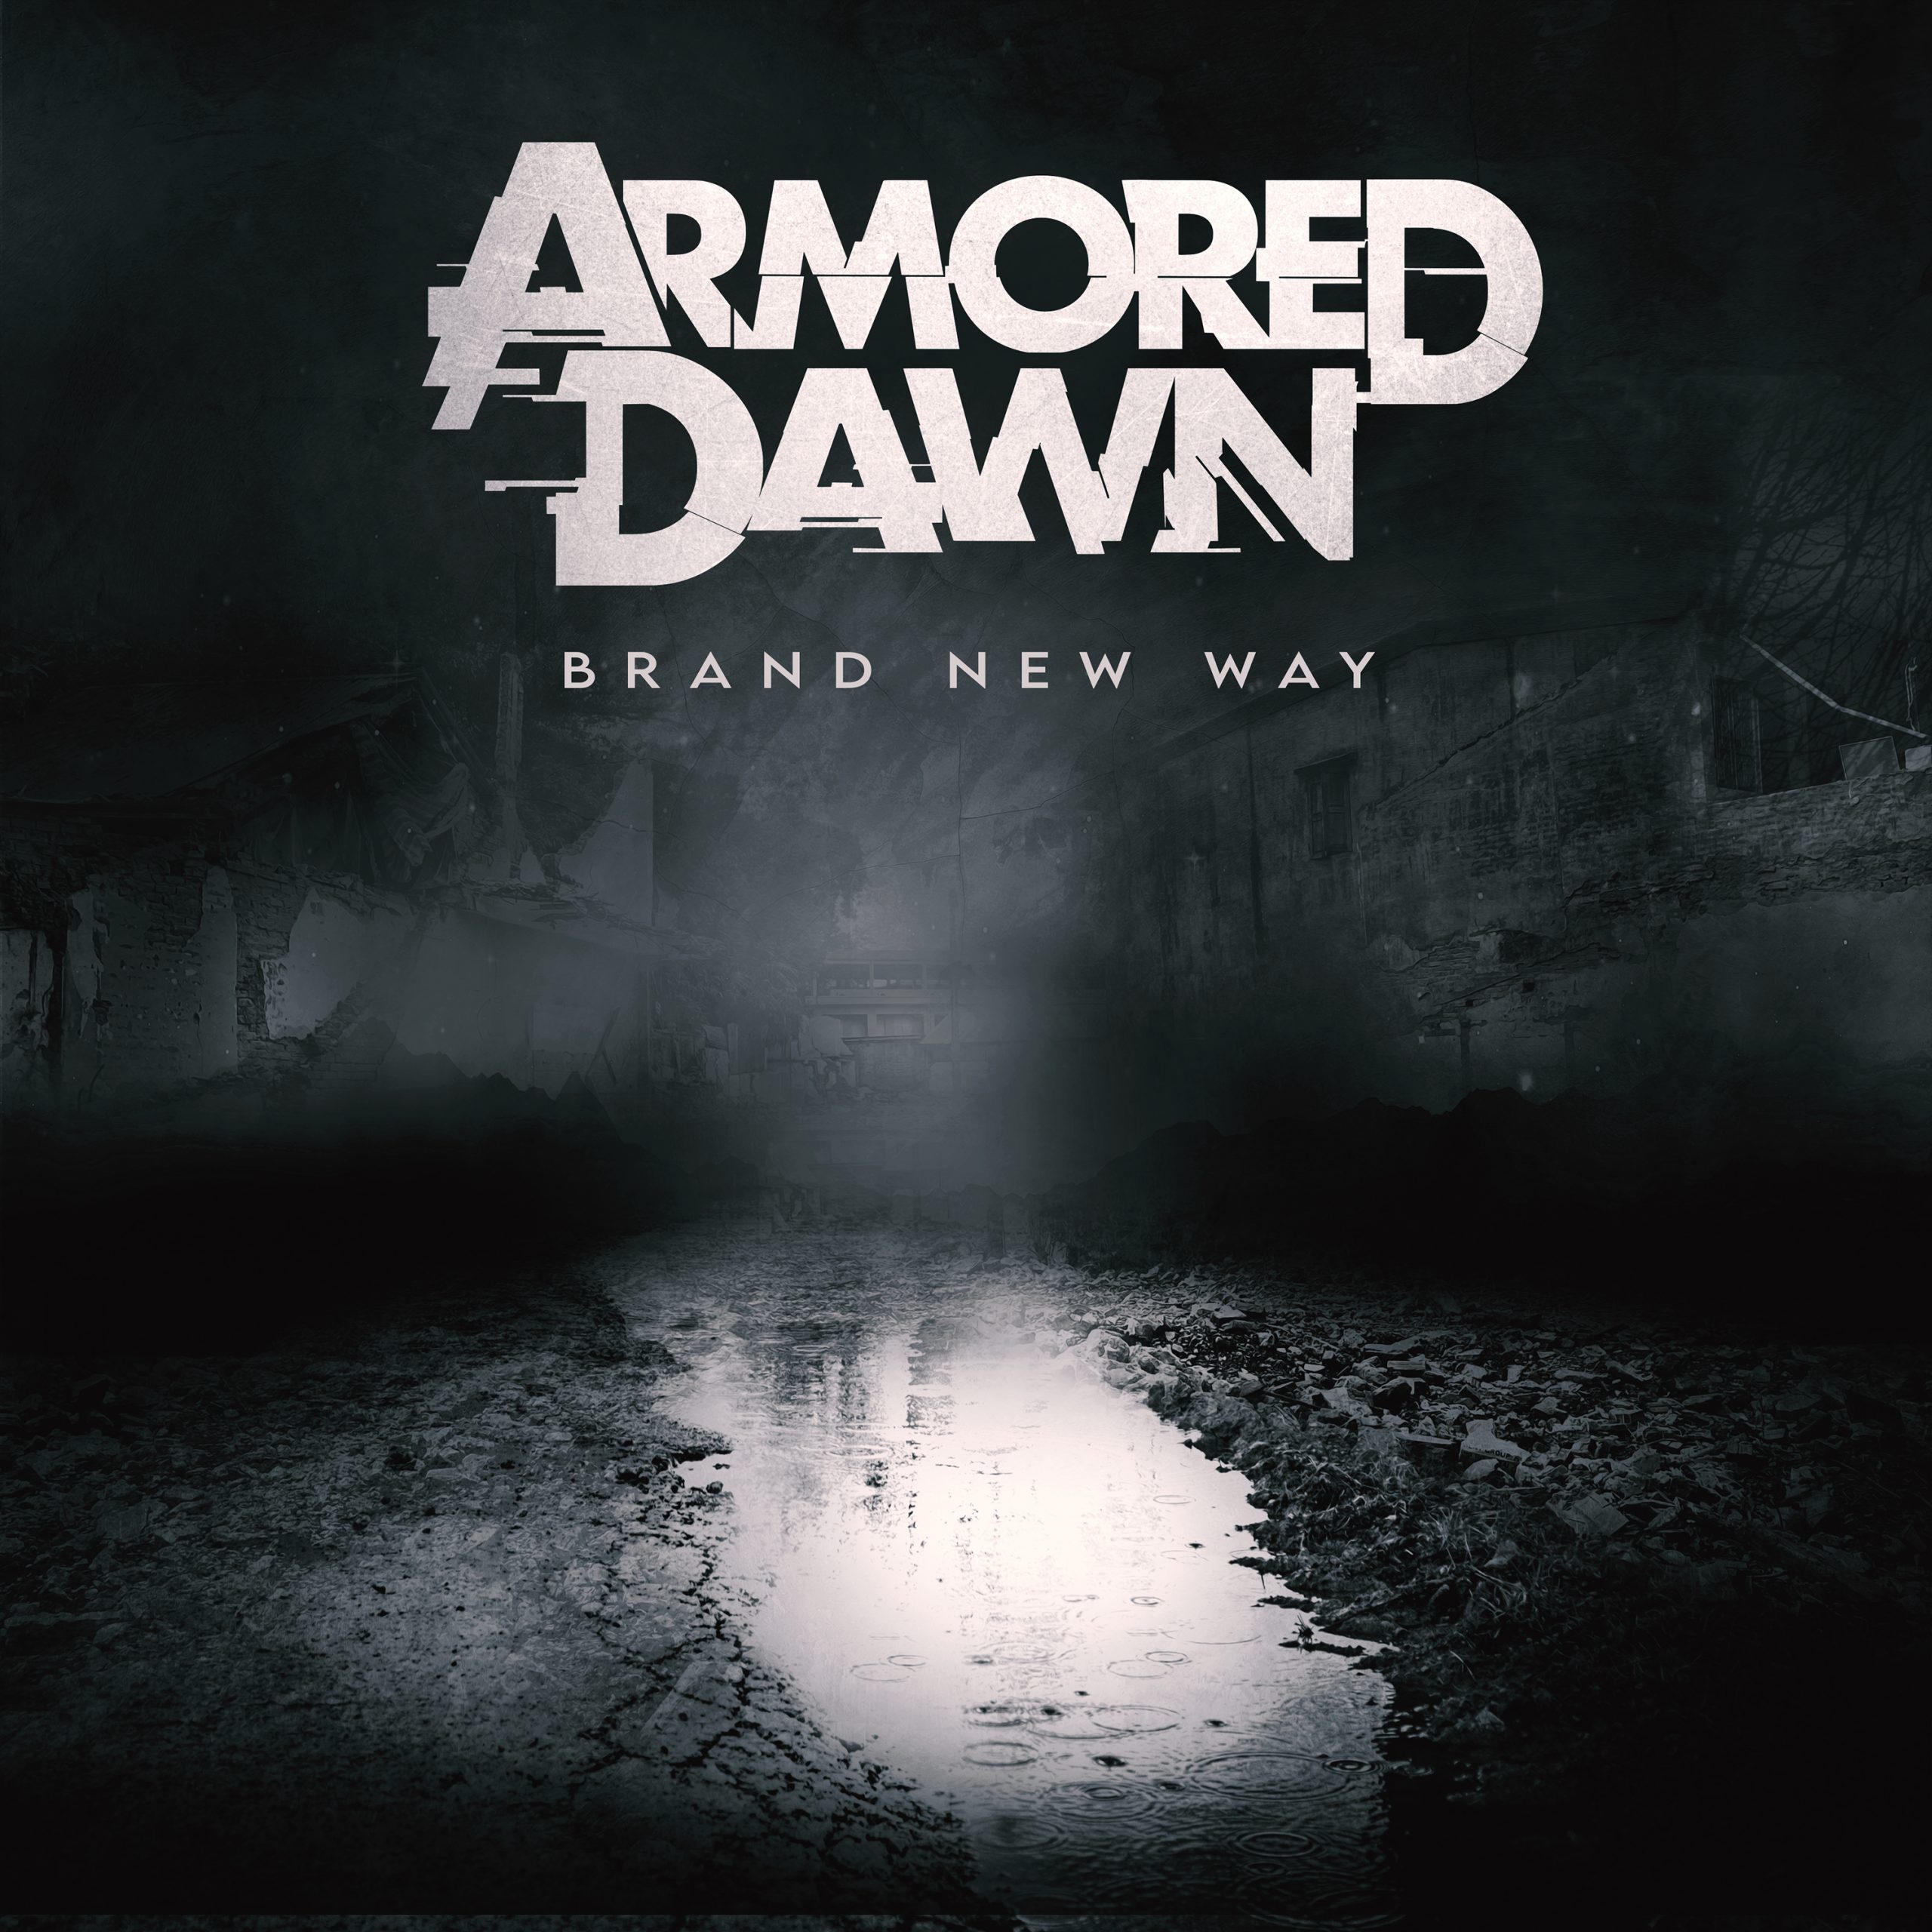 New Beginnings in Sound: Armored Dawn’s ‘Brand New Way’ Signals Fourth Album Arrival” on the playlist.